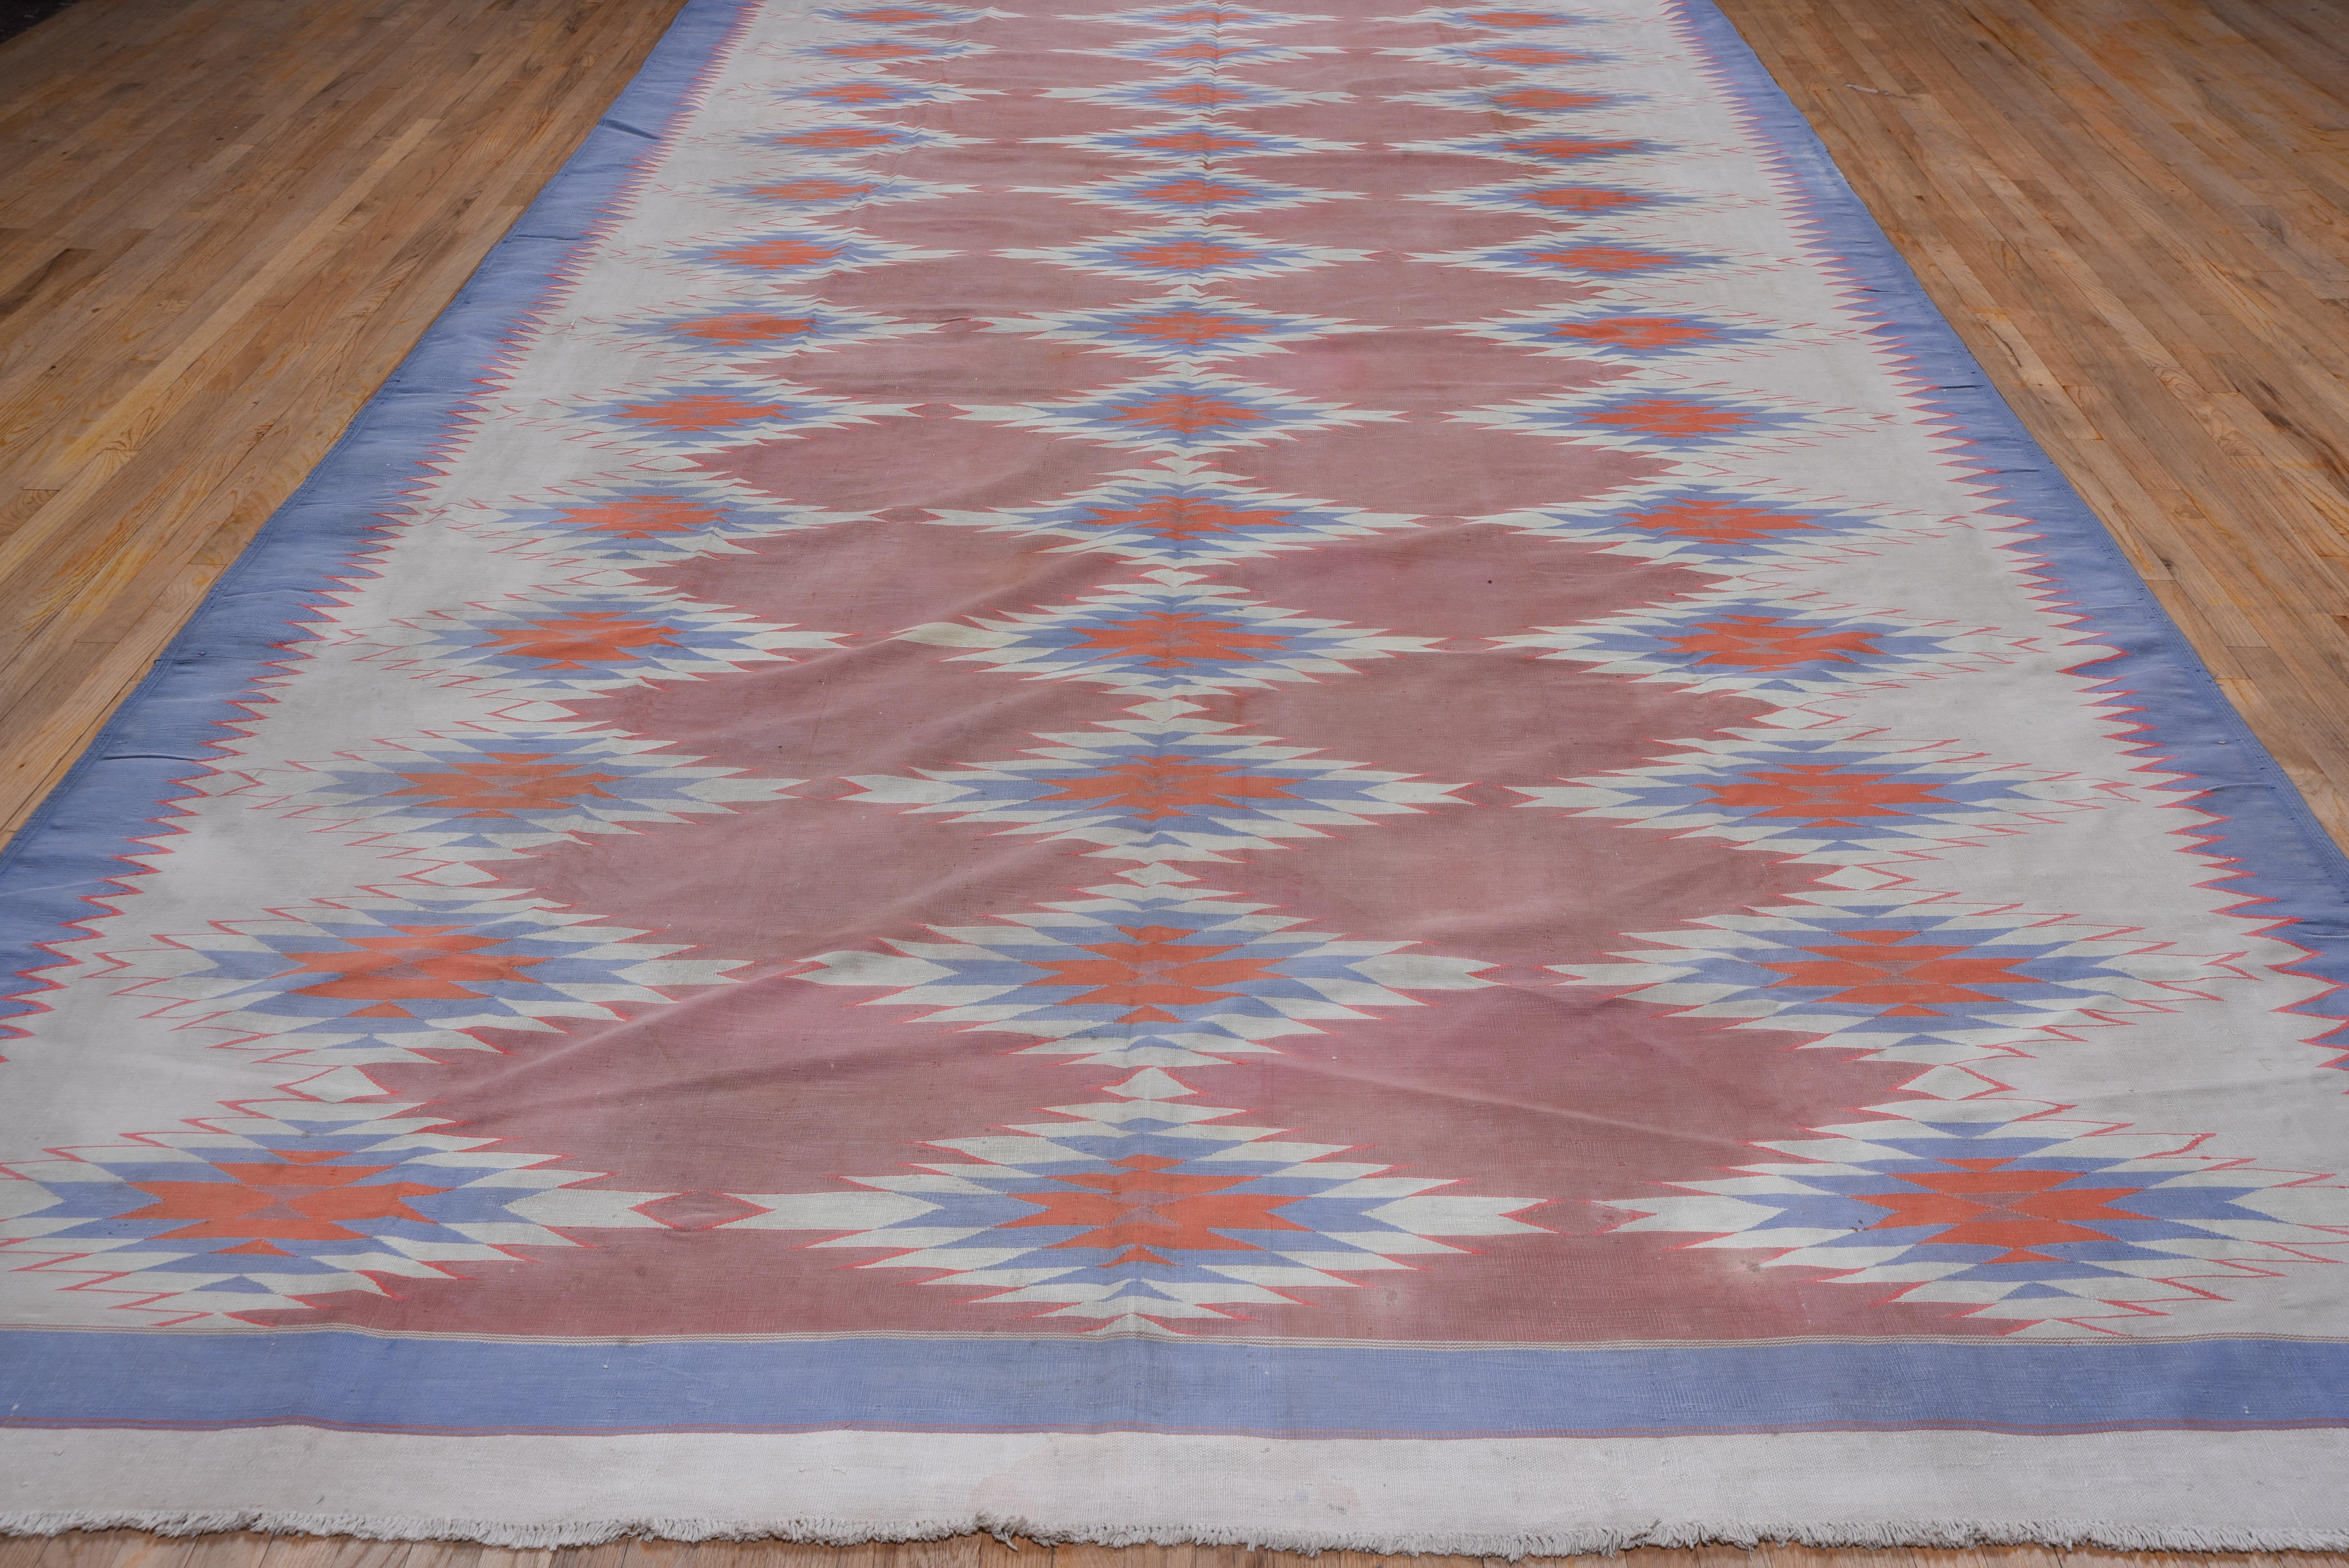 Hand-Woven 1940s Art Deco Cotton Shurrie Rug, Gray, Coral & Orange Field, Blue Borders For Sale